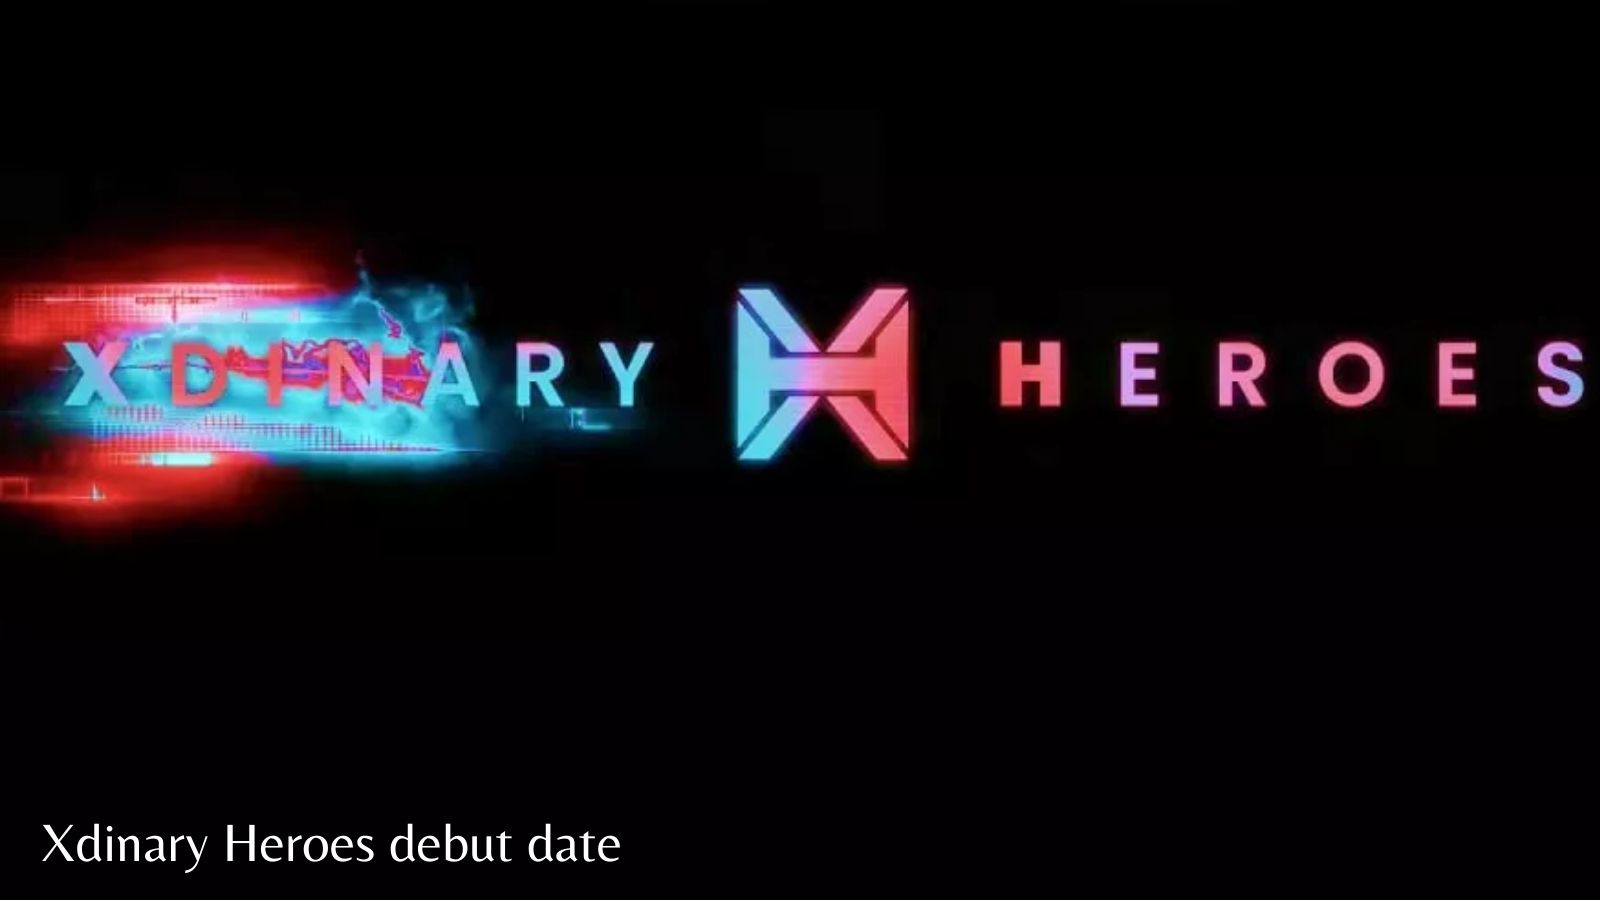 Xdinary Heroes Boy Group Band From JYP Entertainment Has Its Debut Date Set